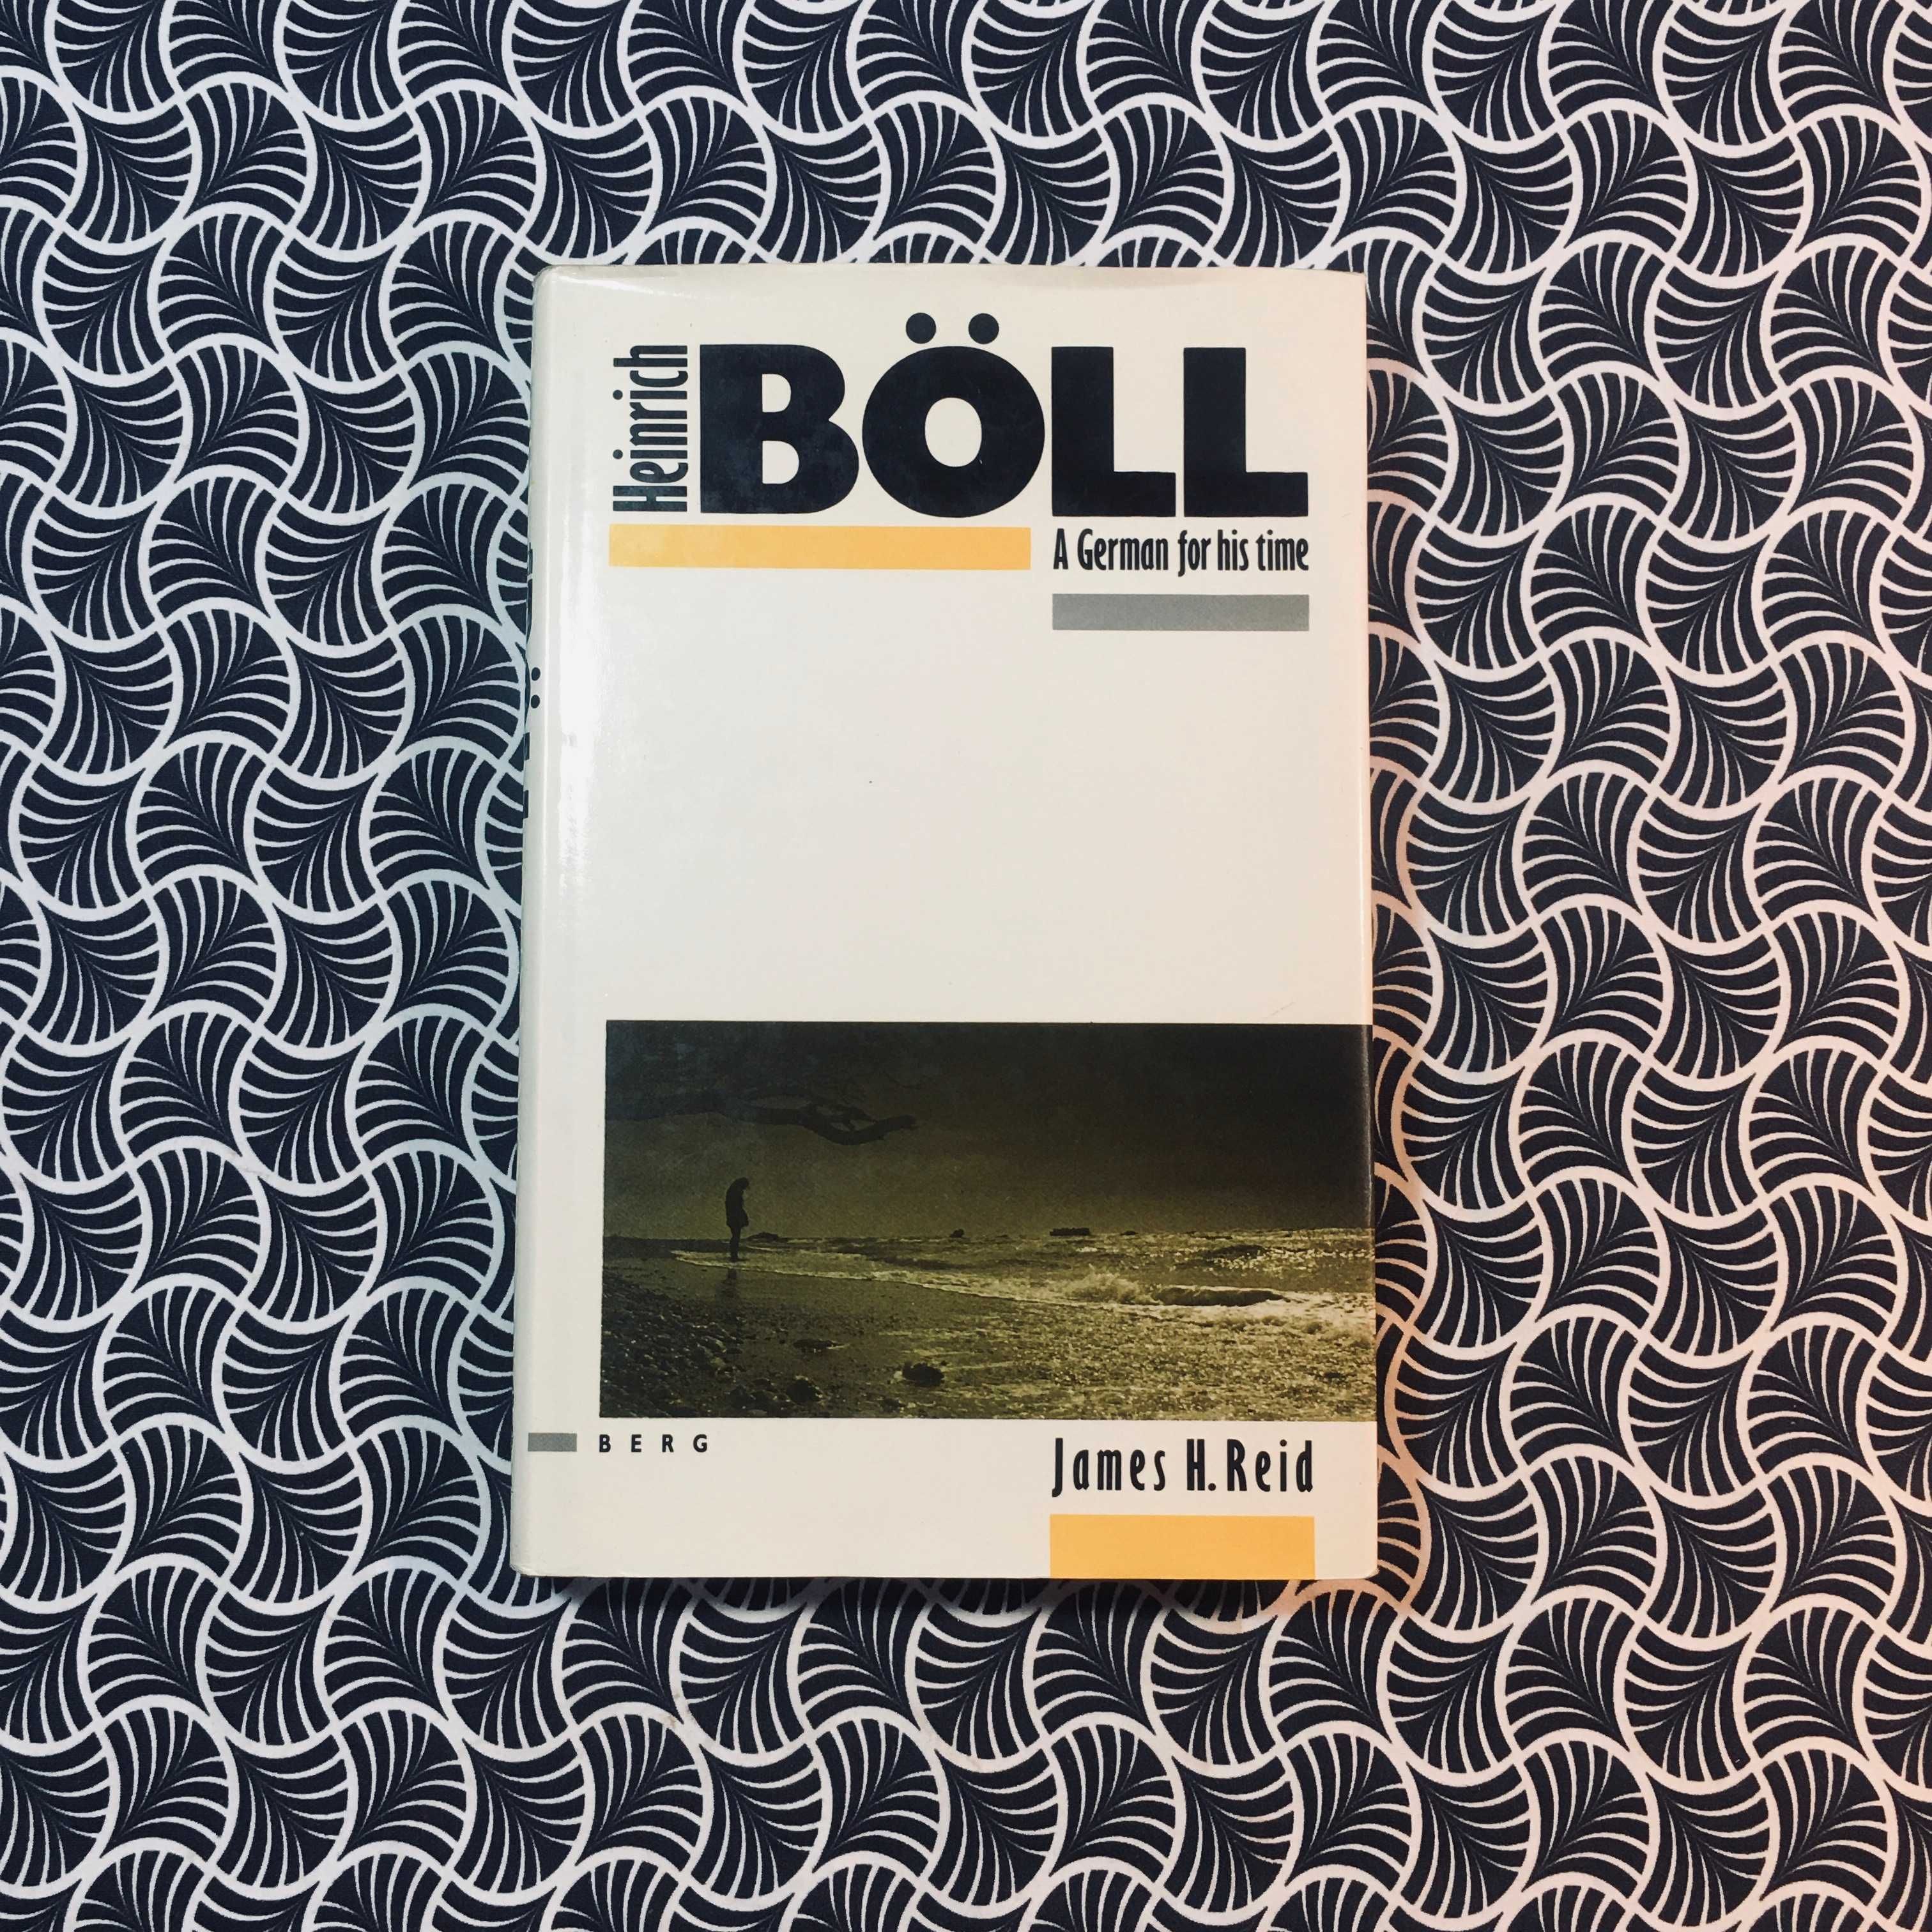 Heinrich Boll: A German for His Time - James H. Reid